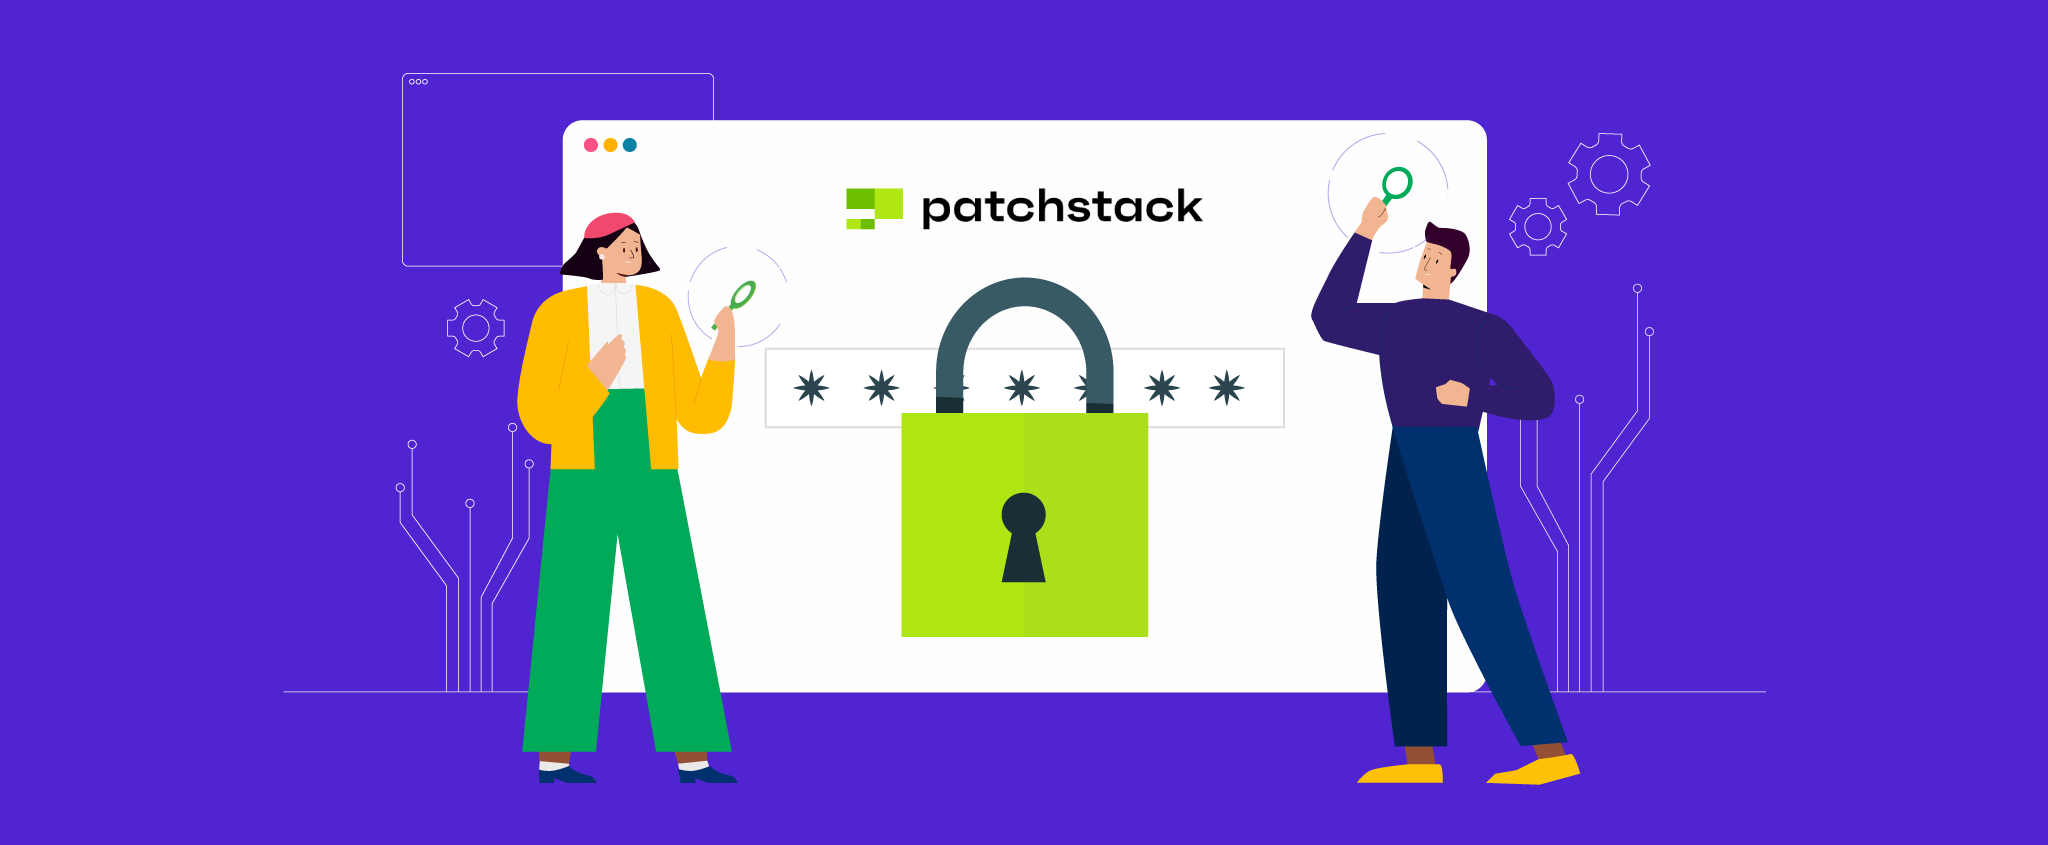 Hostinger Users Can Now Benefit From Patchstack WordPress Security